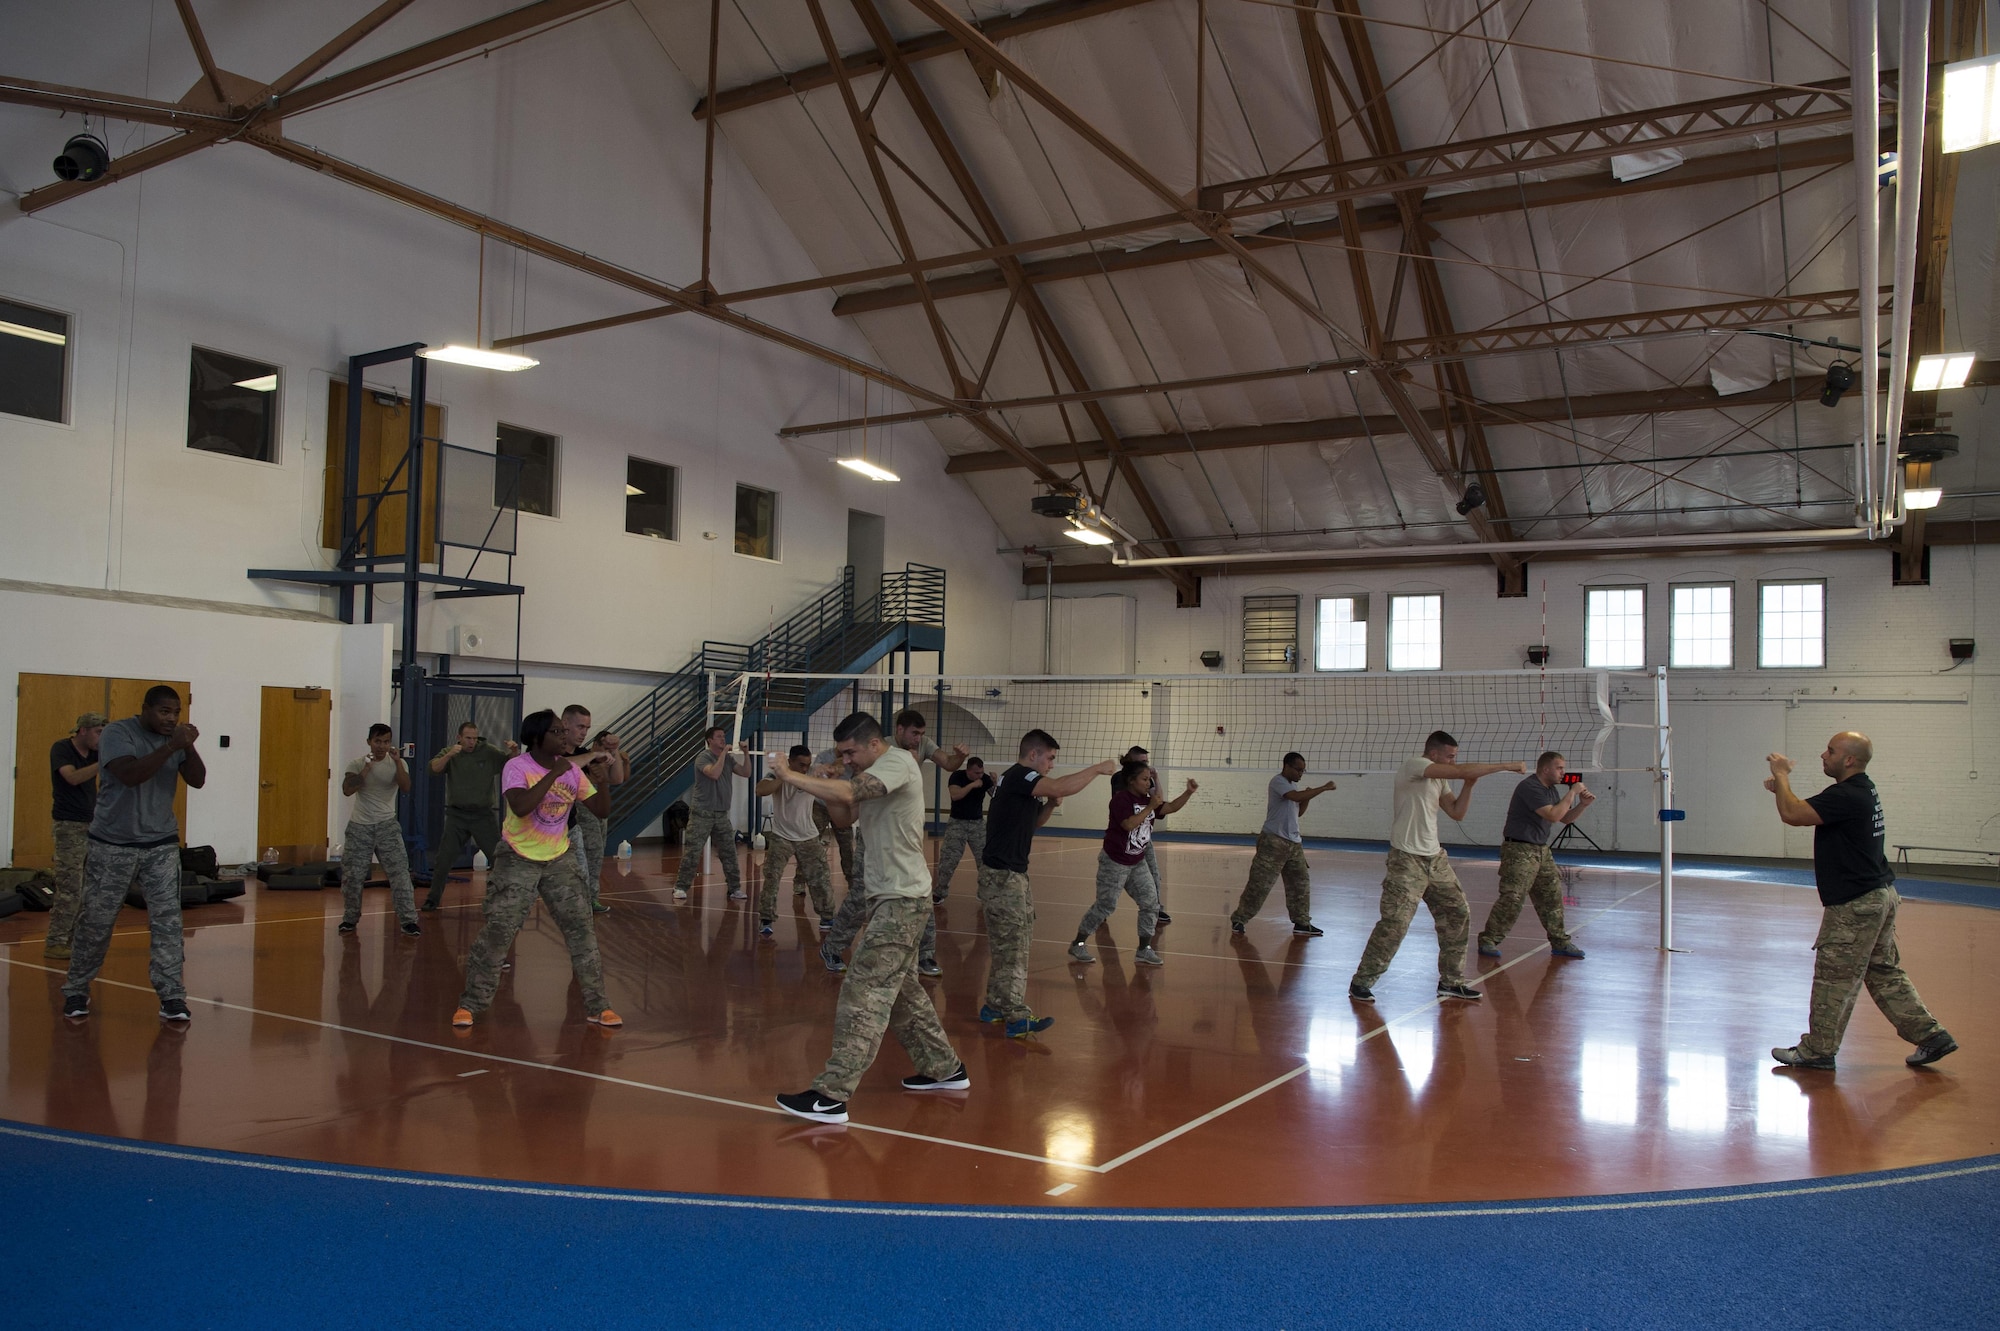 Twentieth Air Force security forces members warm up during a Krav Maga certification course at F.E. Warren Air Force Base, Sept. 14, 2016. This was the first time the week-long course was offered to defenders in 20th AF. The certification allows these Airmen to share the self-defense training with their respective units. The 20th AF ICBM Center of Excellence offers multiple training and professional development courses throughout the year for all Airmen, regardless of rank or Air Force specialty code. (U.S. Air Force photo by Staff Sgt. Christopher Ruano)